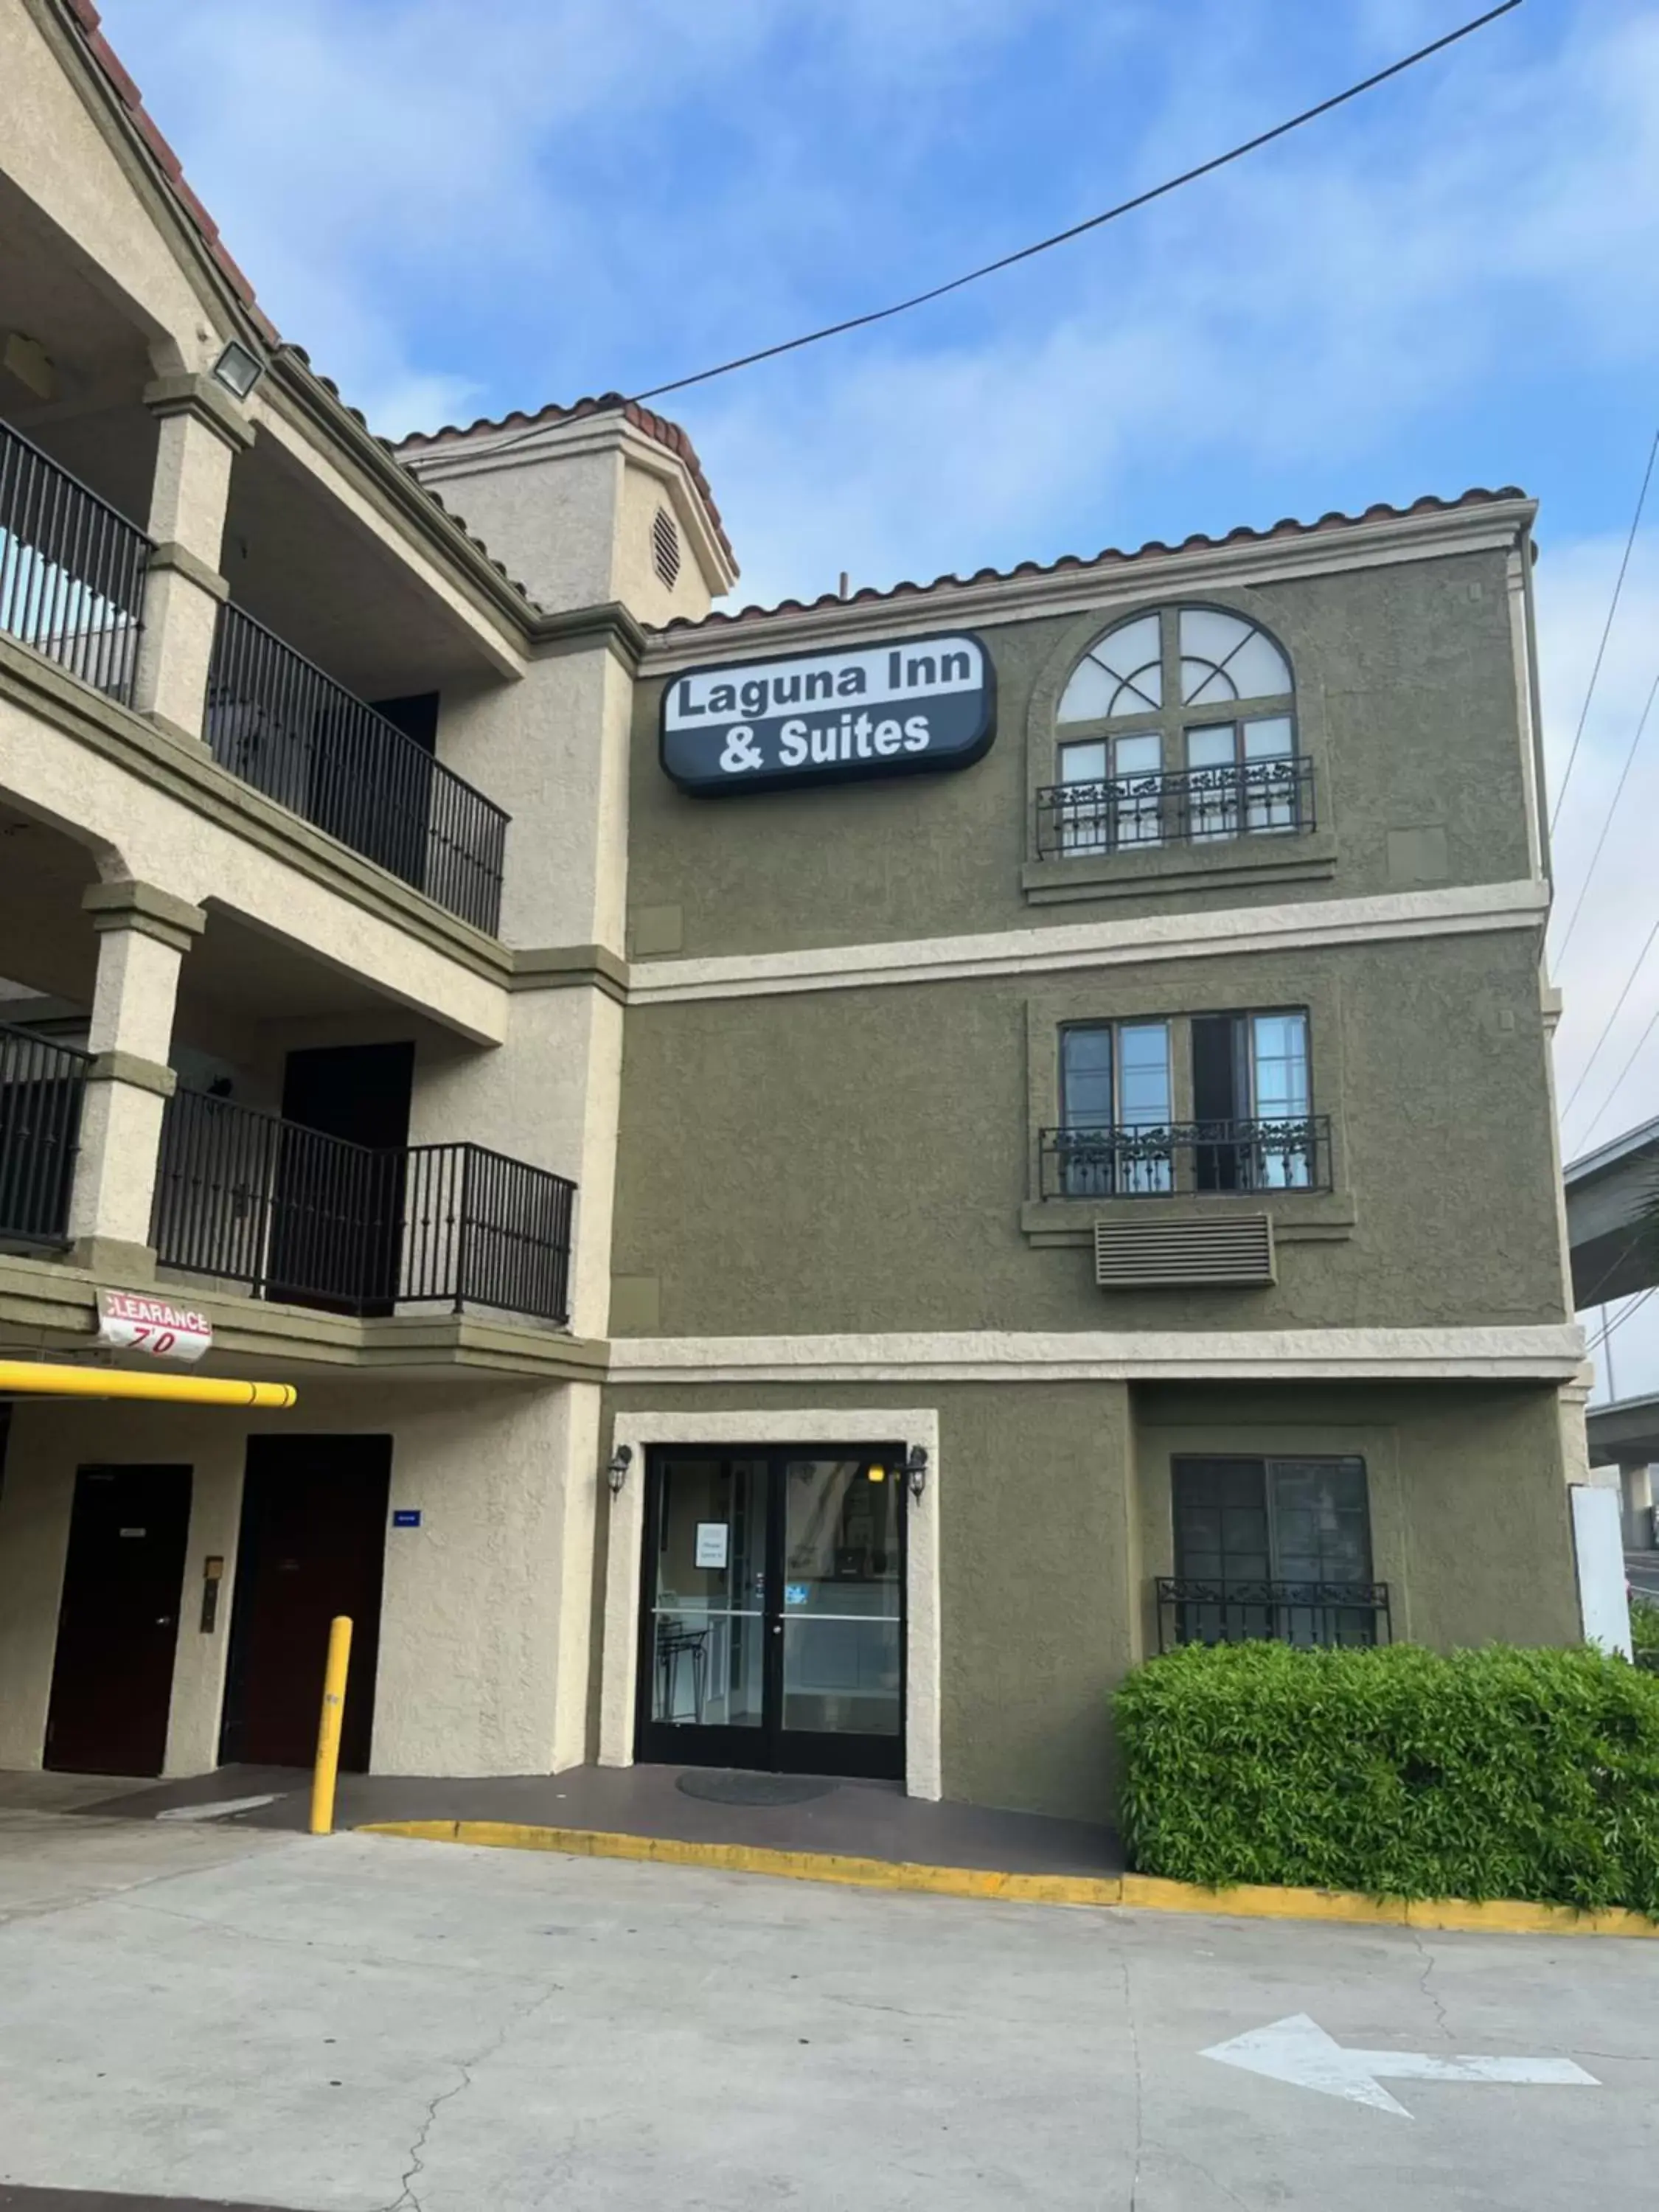 Property Building in Laguna Inn and Suites